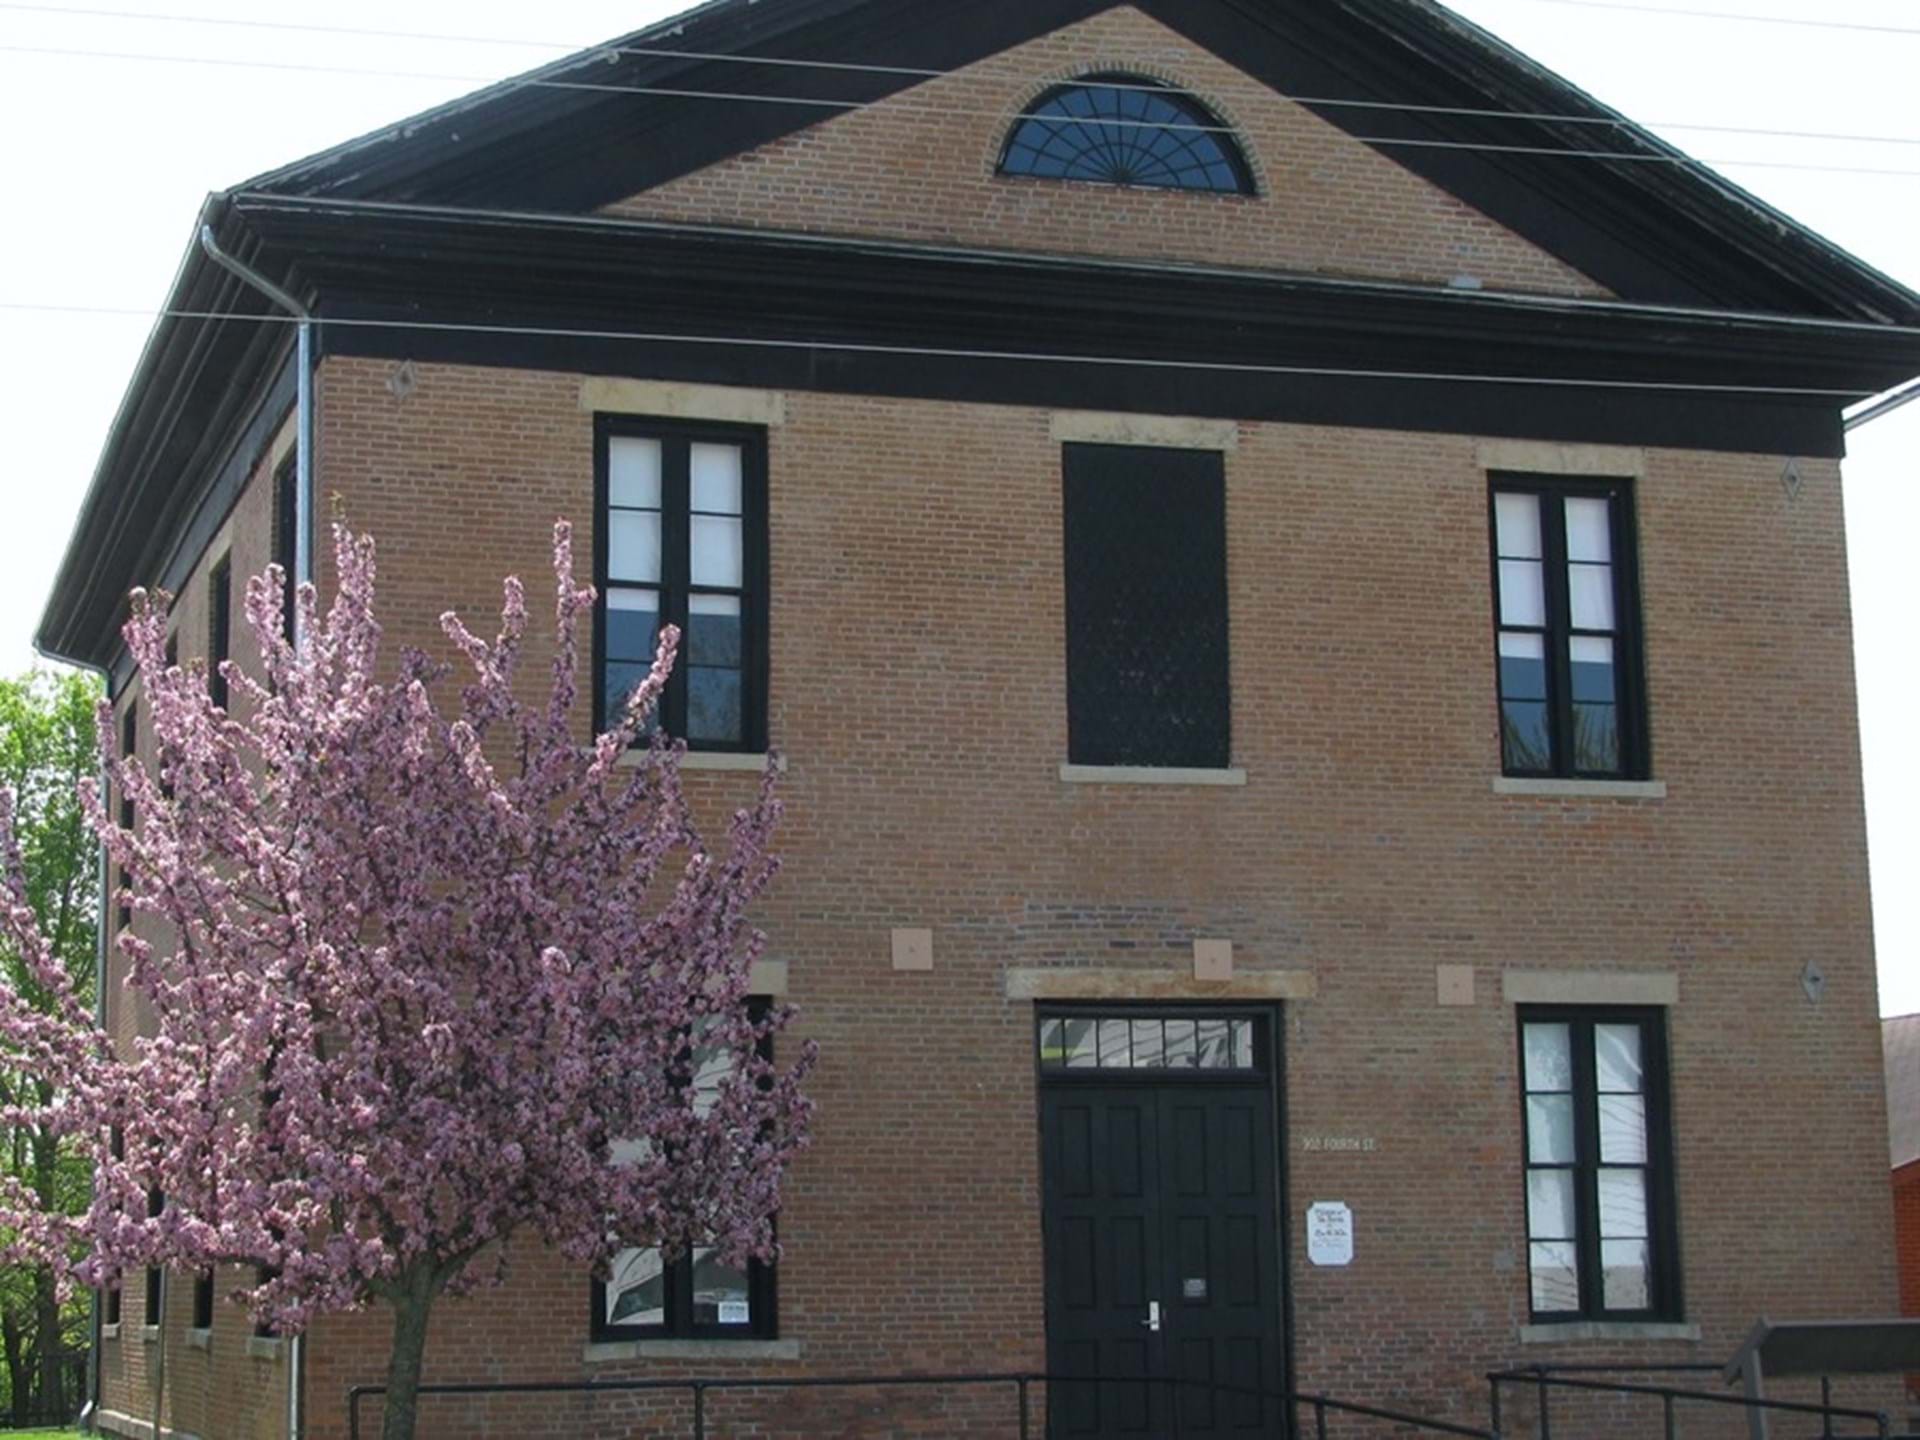 Courthouse in the Spring